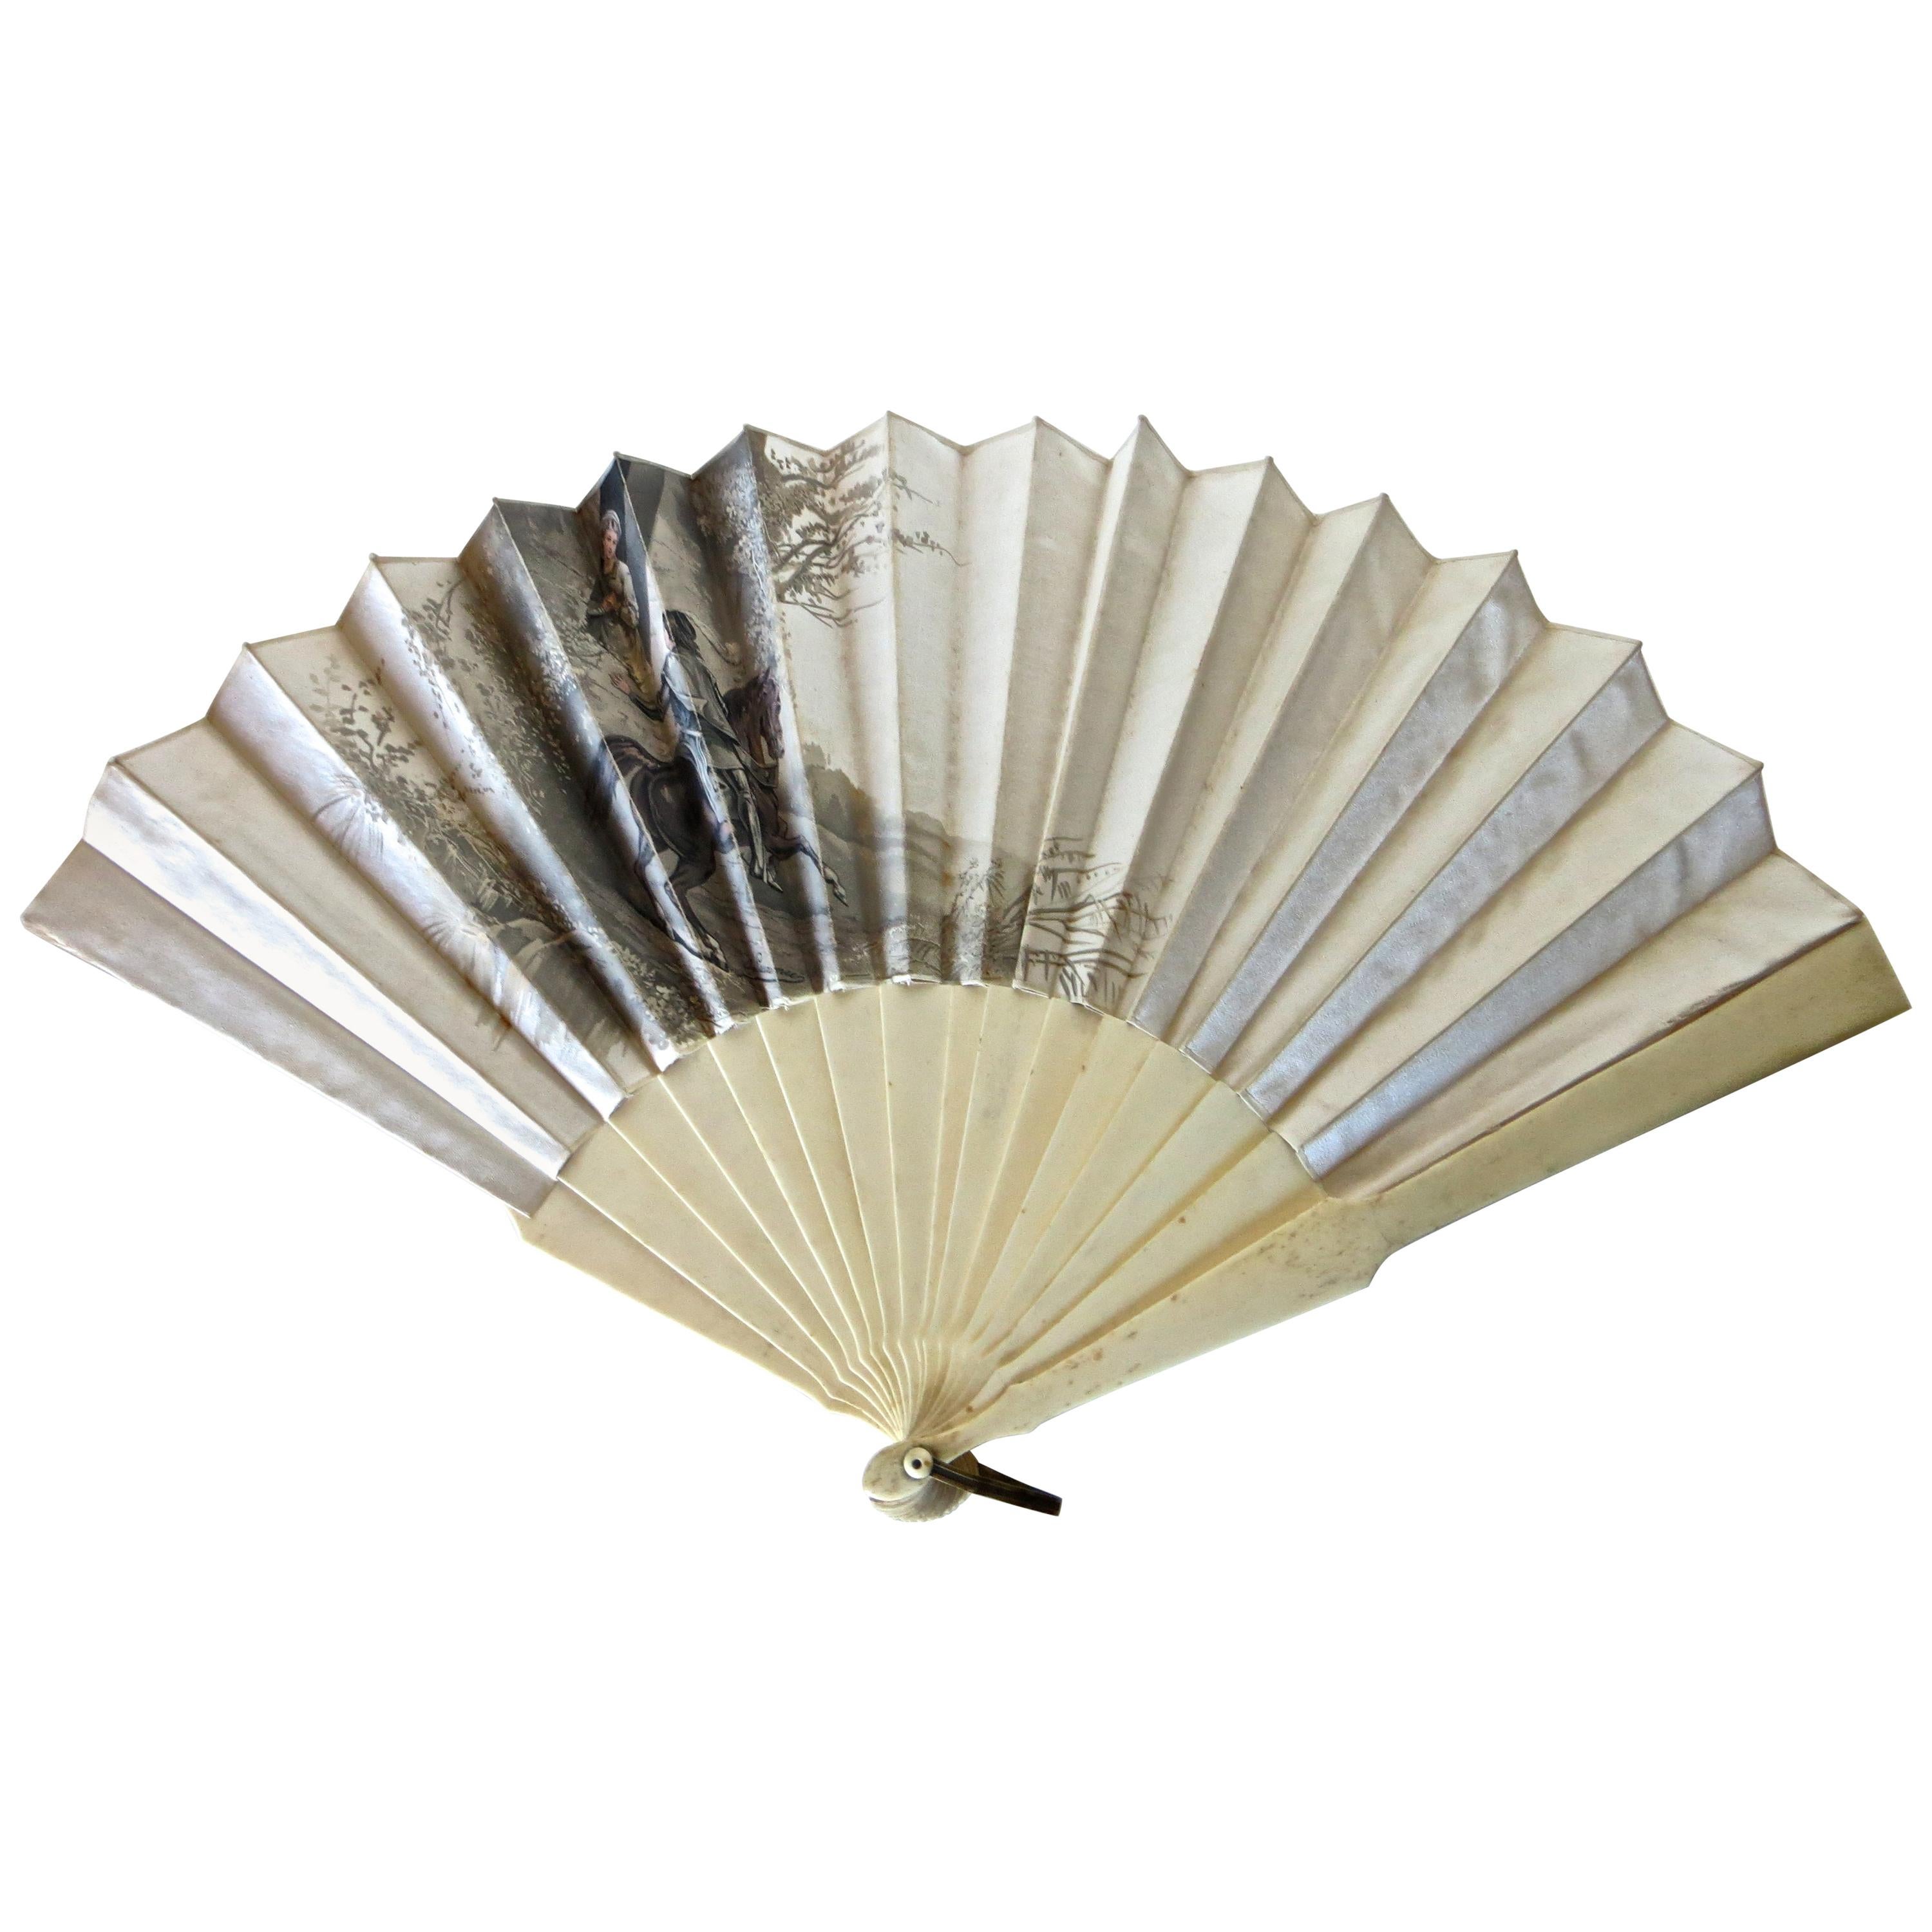 Hand Held 19th Century Fan. Signed "Aug Lauronce", French, circa 1885